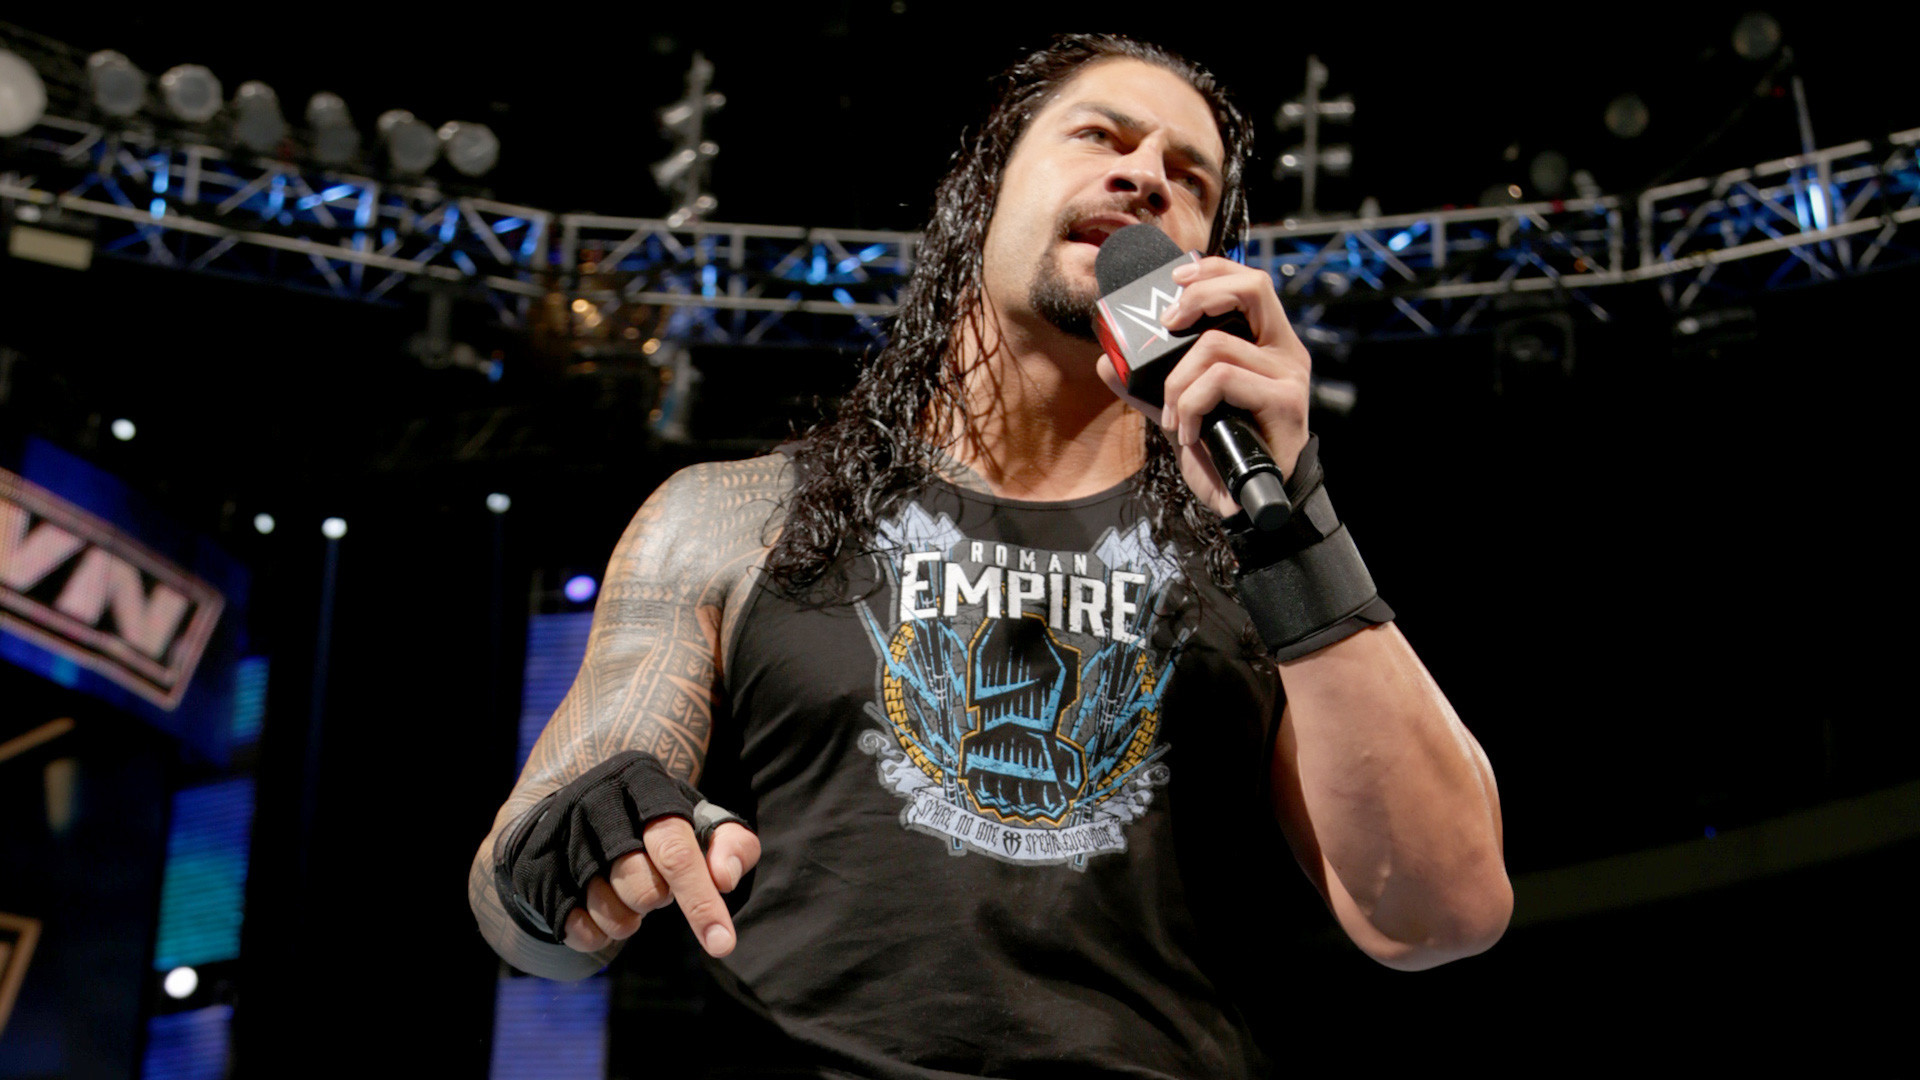 1920x1080 Roman Reigns as Anchor in wwe